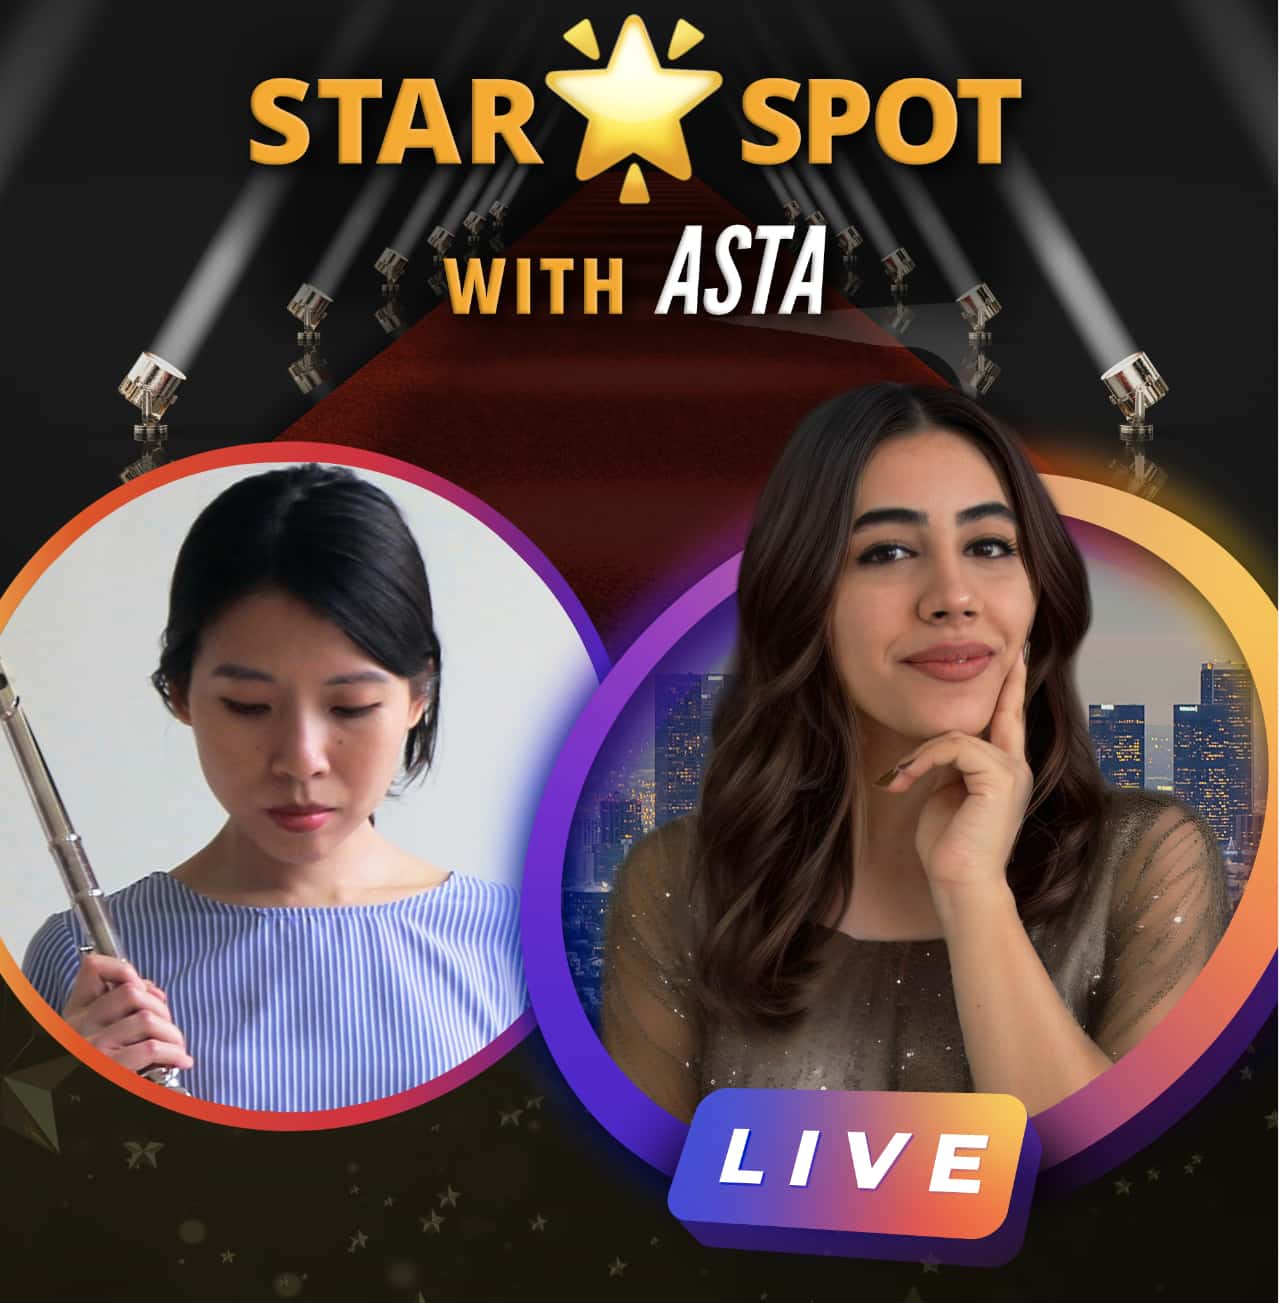 Promotional cover art of Star Spot with Asta